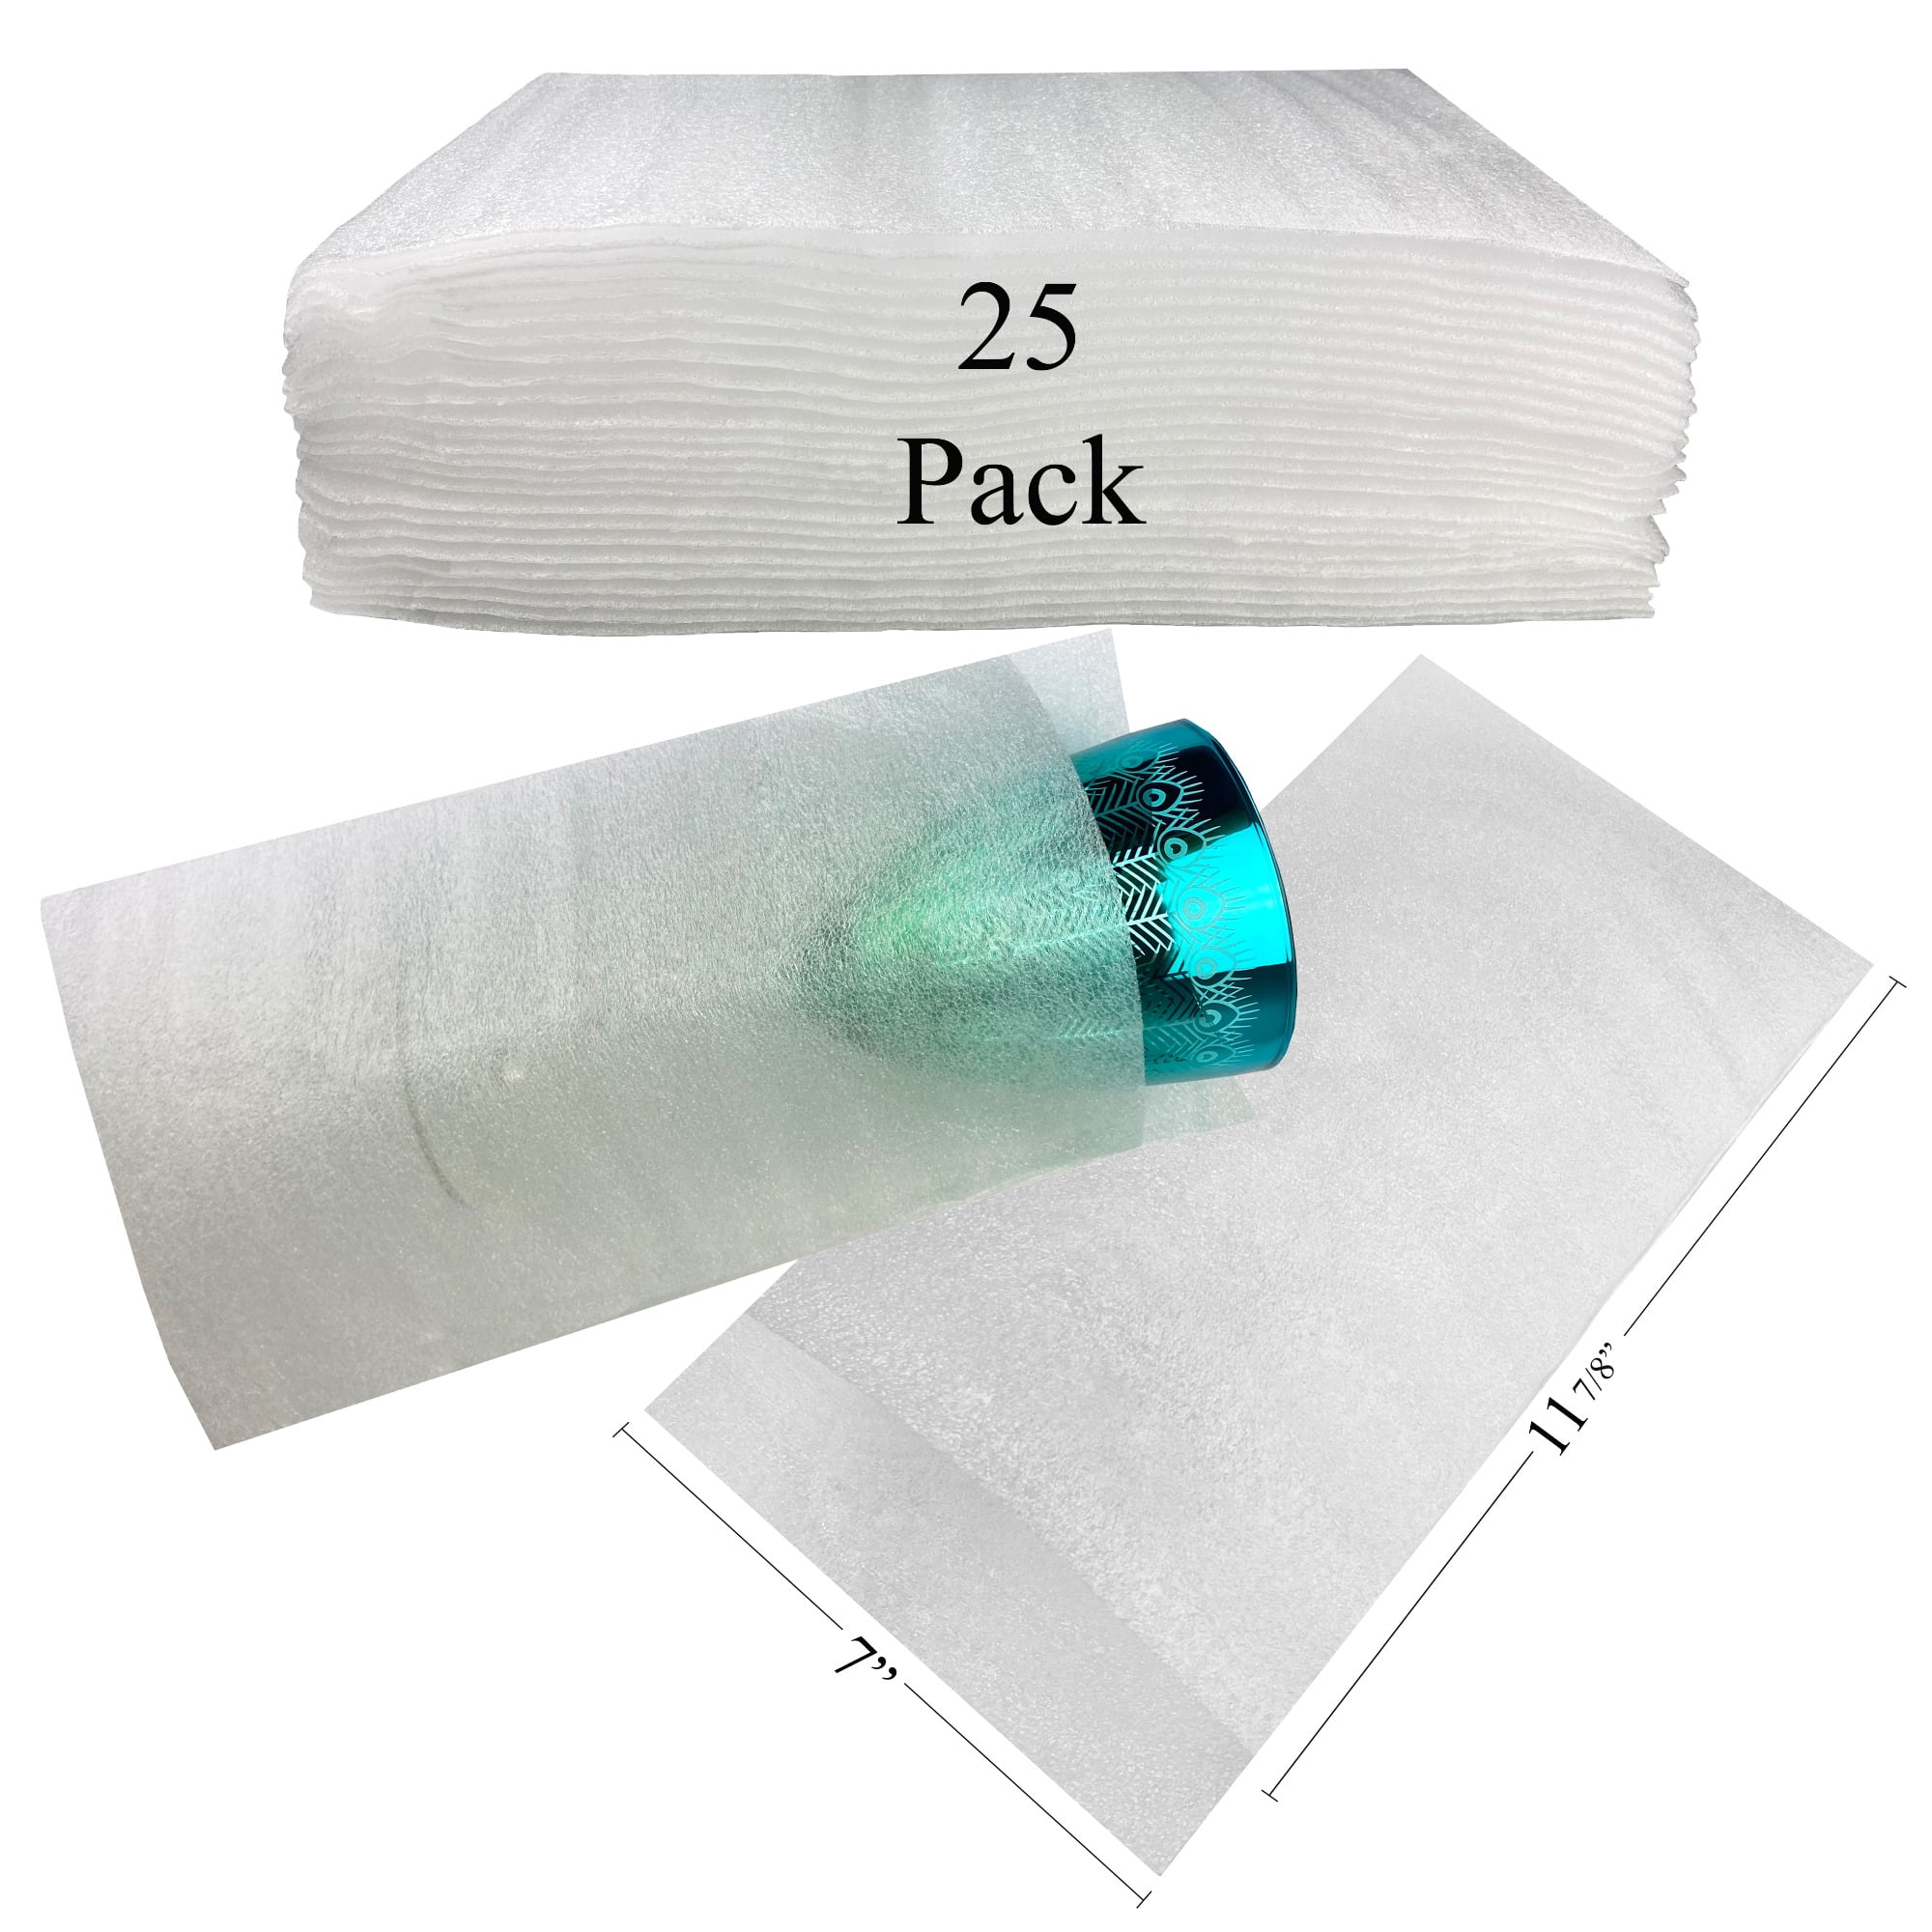 Porcelain & Fragile Items Glasses Foam Wrap Cup Pouches 7 x 11 7/8” 50 Count Packing Supplies for Moving by California Basics Cushion Pouches to Protect Dishes